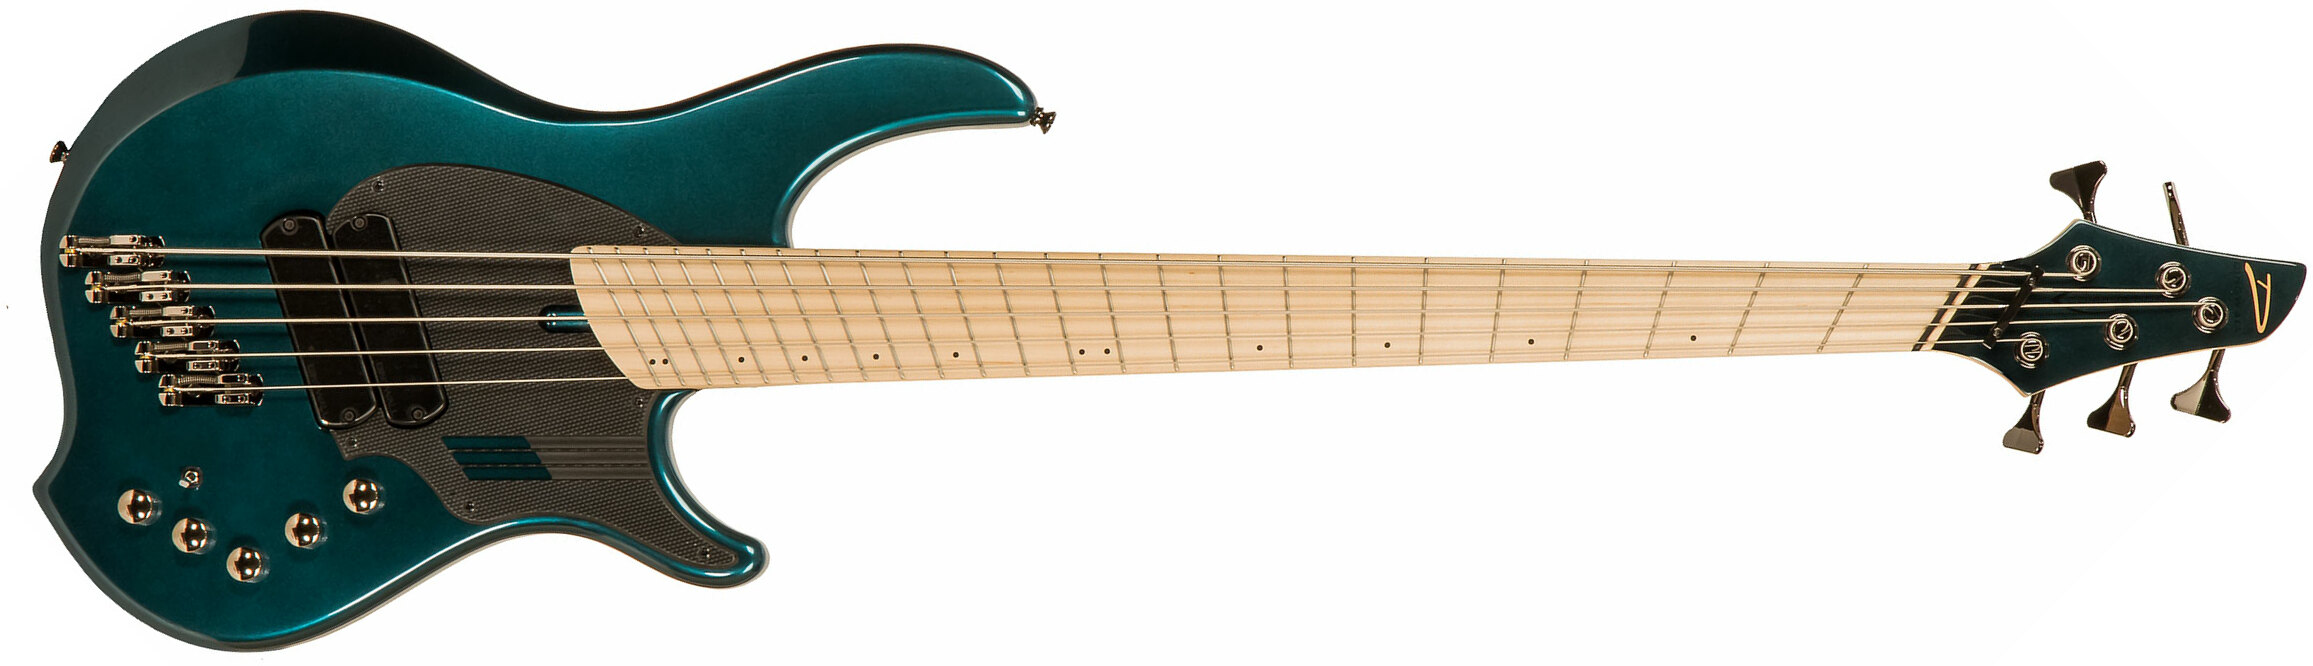 Dingwall Adam Nolly Getgood Ng2 5c Signature 2pu Active Mn - Black Forrest Green - Solid body electric bass - Main picture